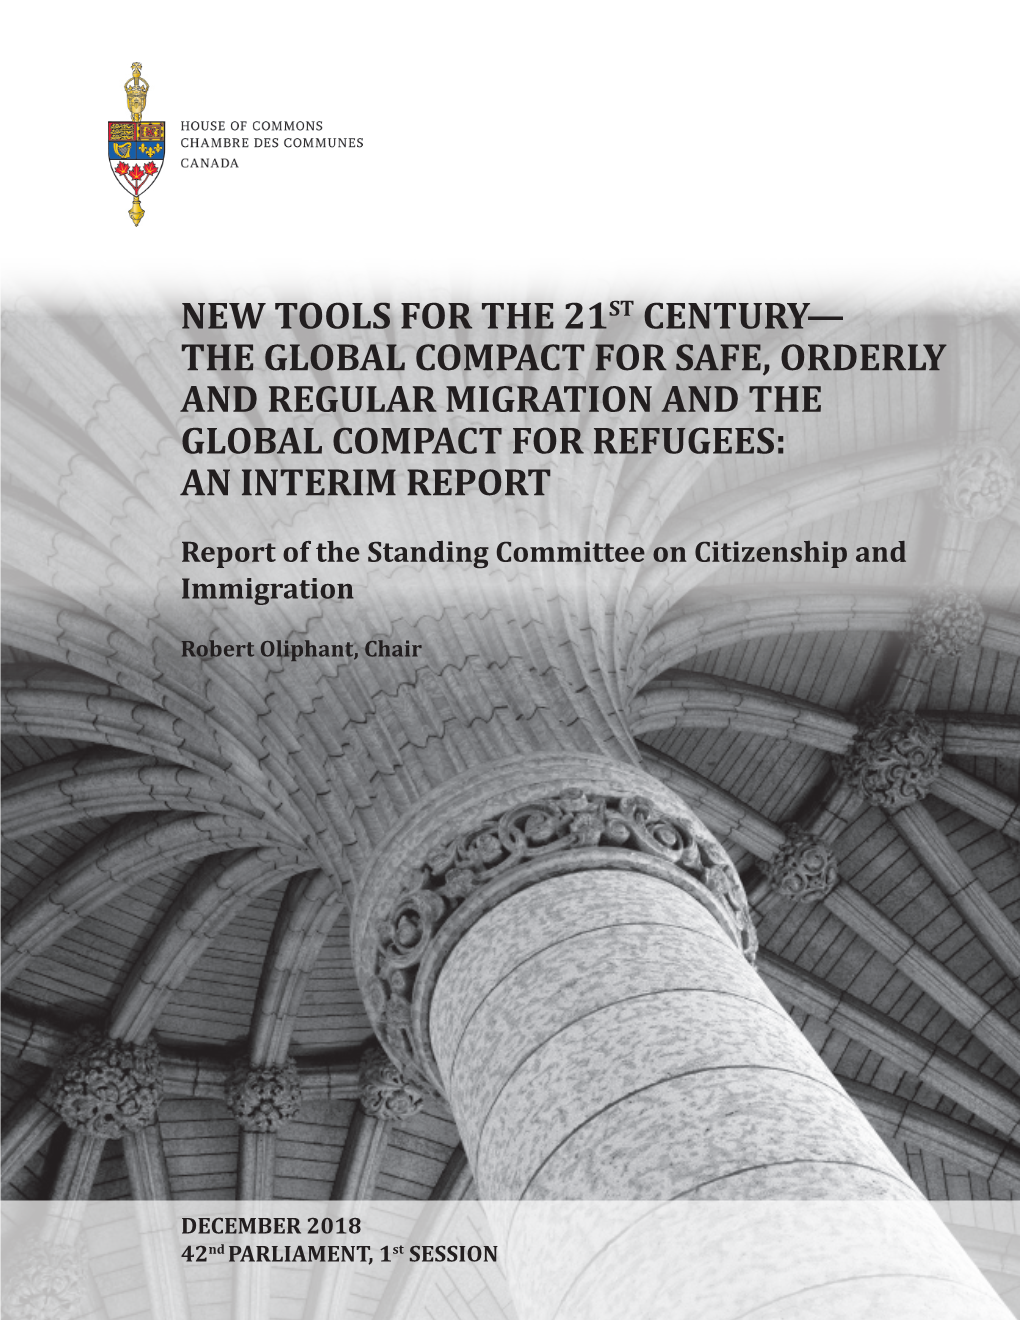 The Global Compact for Safe, Orderly and Regular Migration and the Global Compact for Refugees: an Interim Report